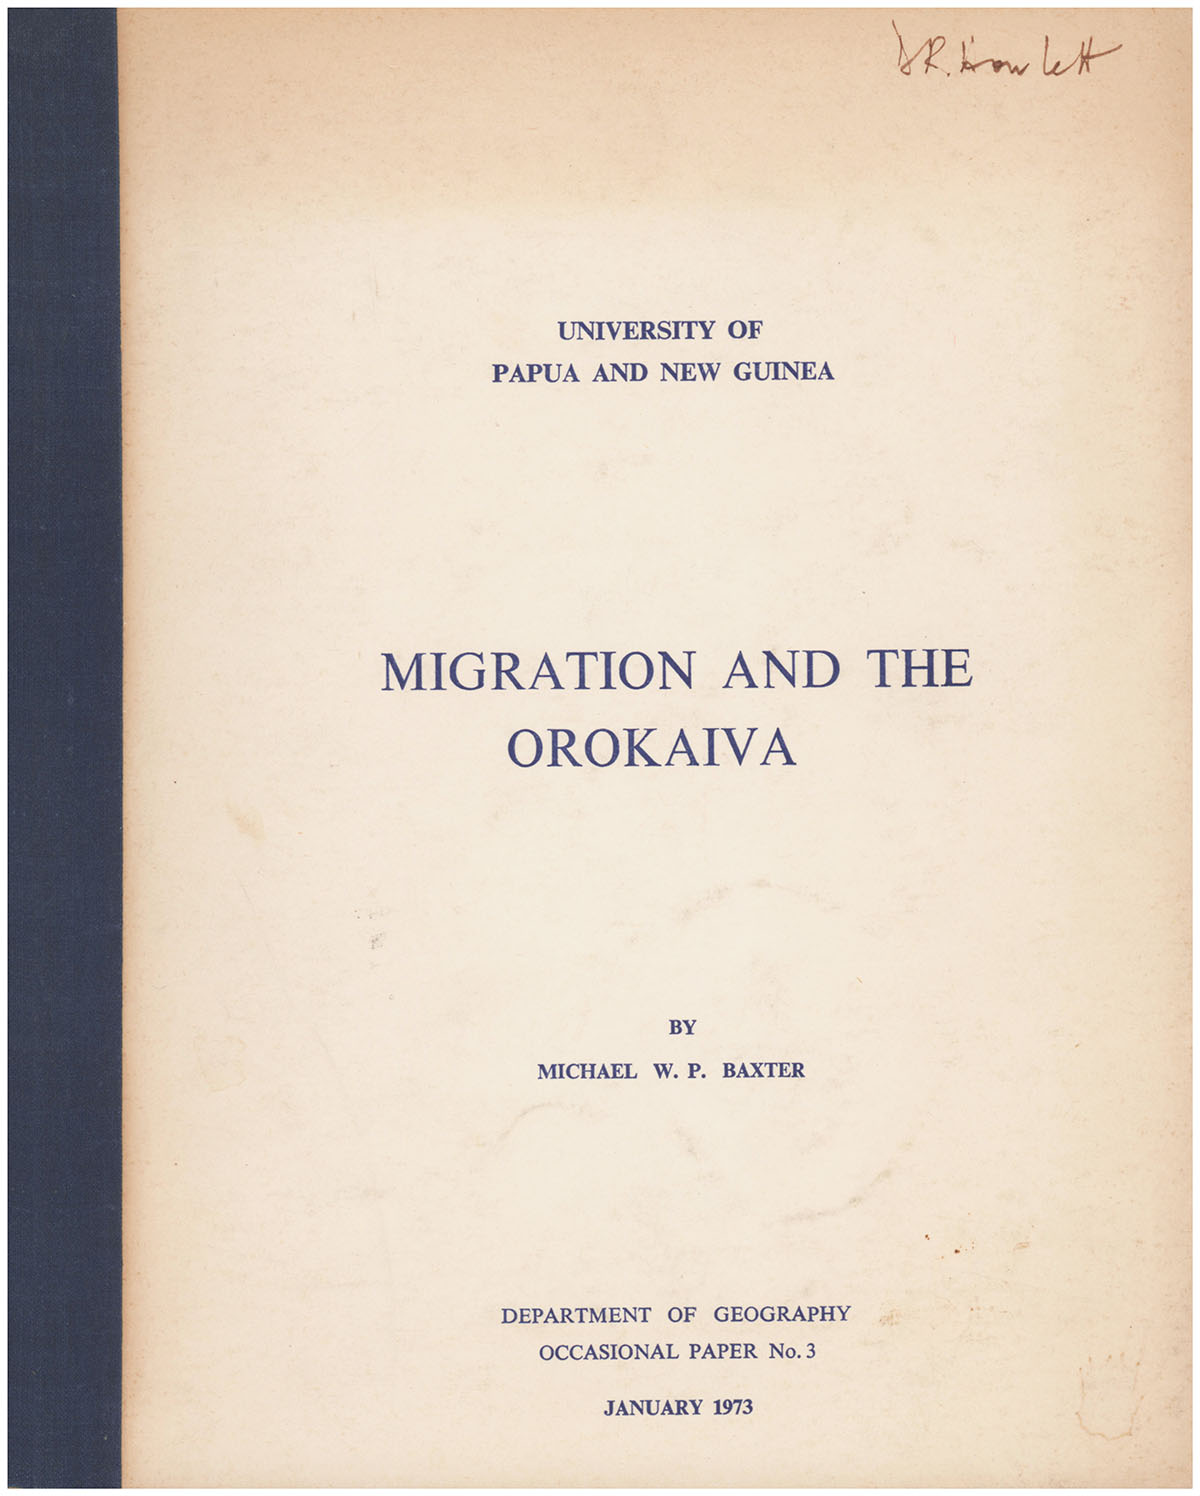 Baxter, Michael W. P. - Migration and the Orokaiva (Occasional Paper 3)